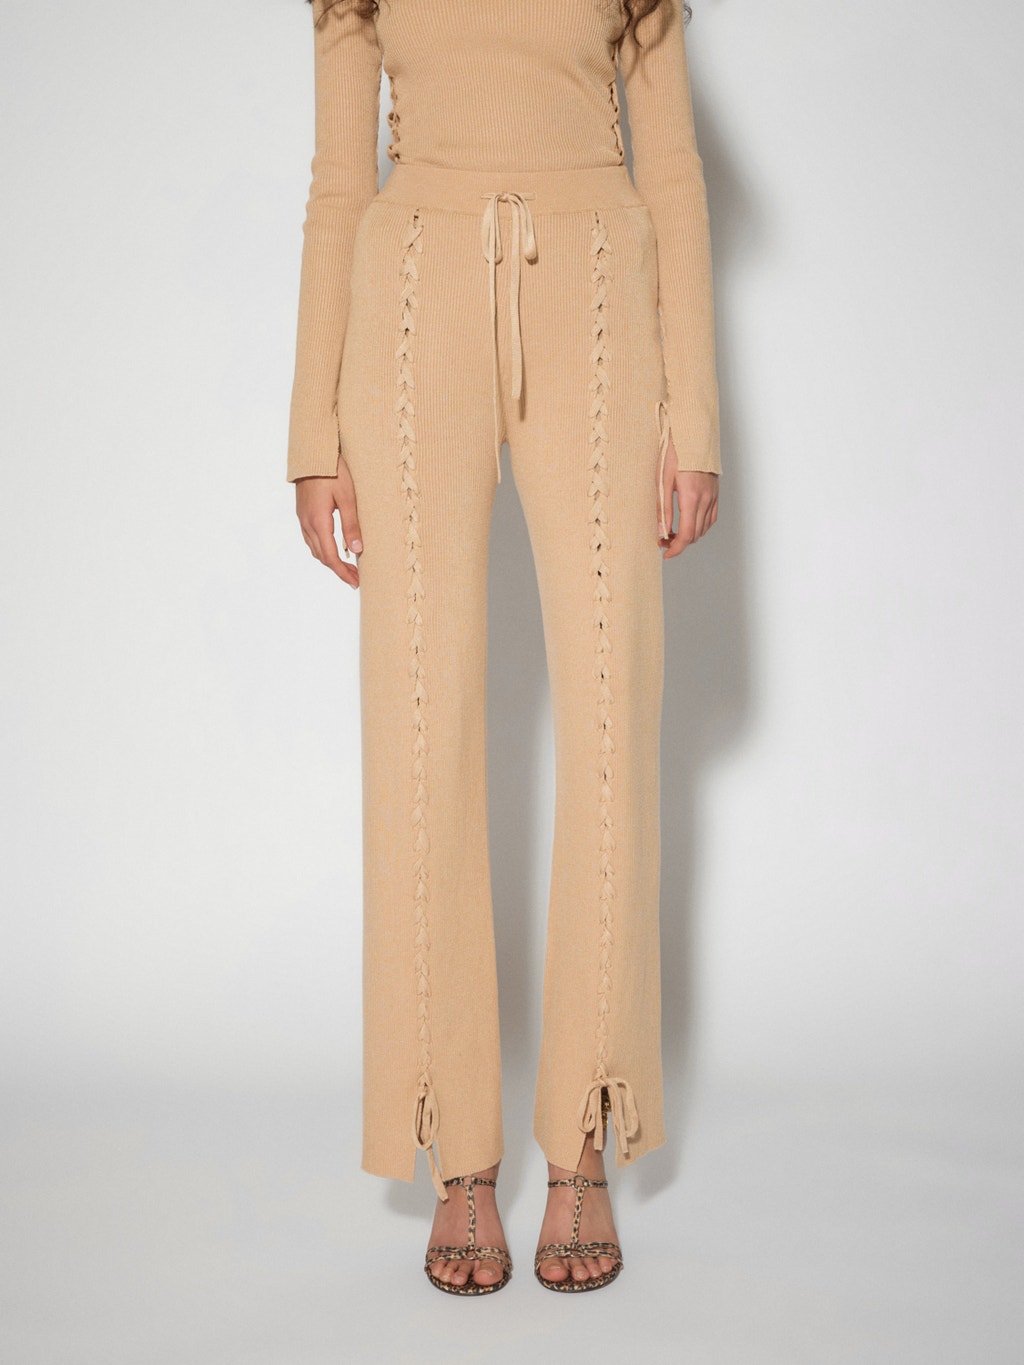 Somethignew beige jersey trousers with crosses